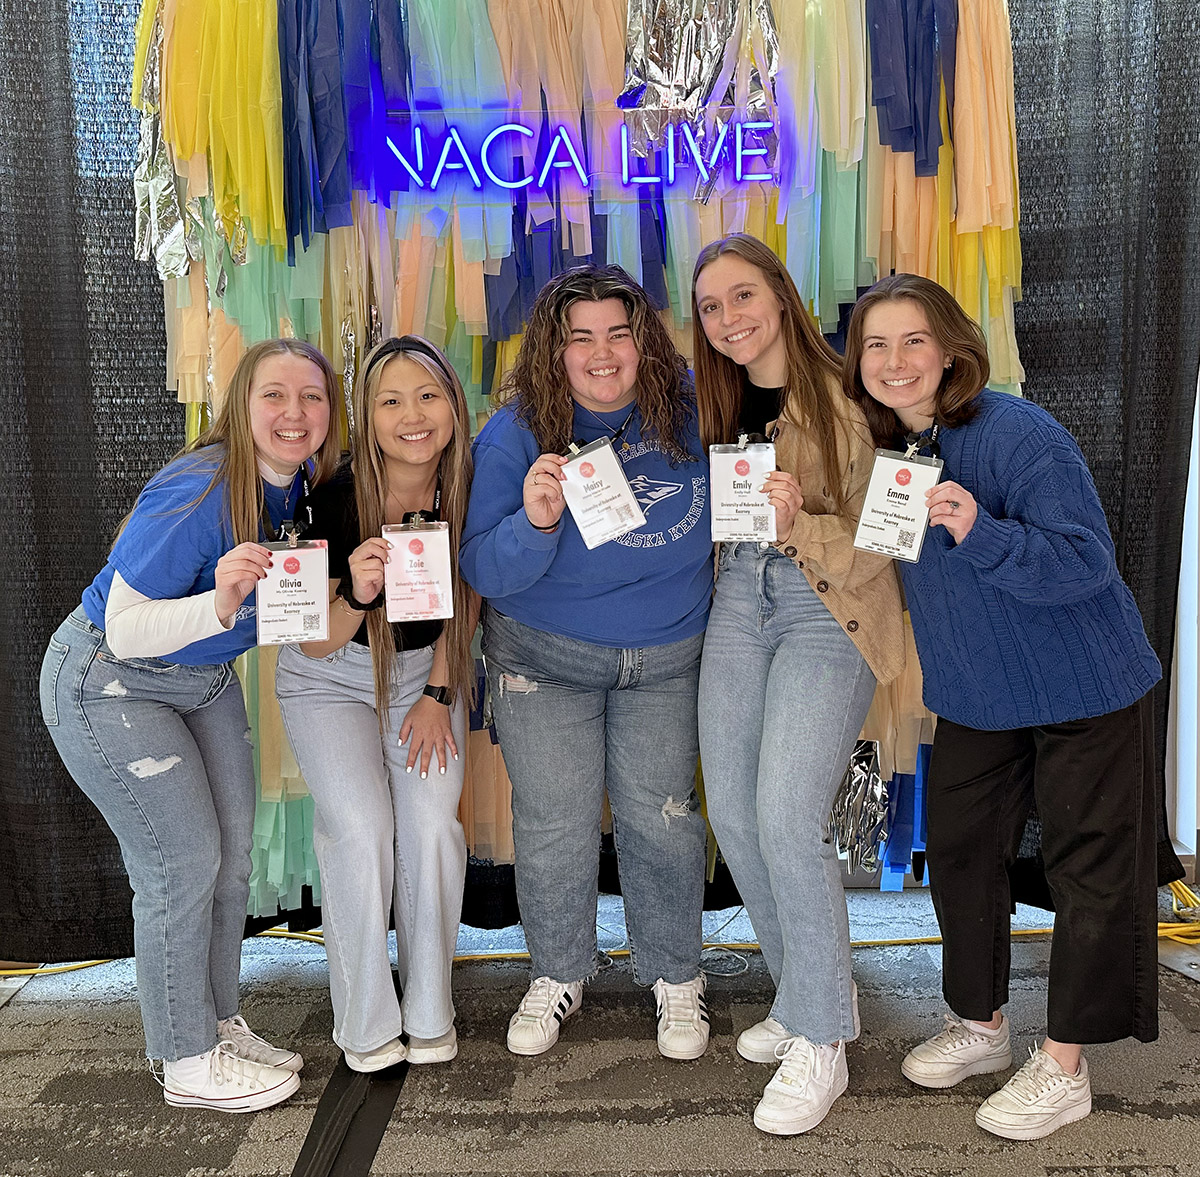 LPAC members, from left, Olivia Koenig, Zoie Jacobsen, Maisy Wade, Emily Hall and Emma Bond are pictured during a recent National Association for Campus Activities convention in Louisville, Kentucky.